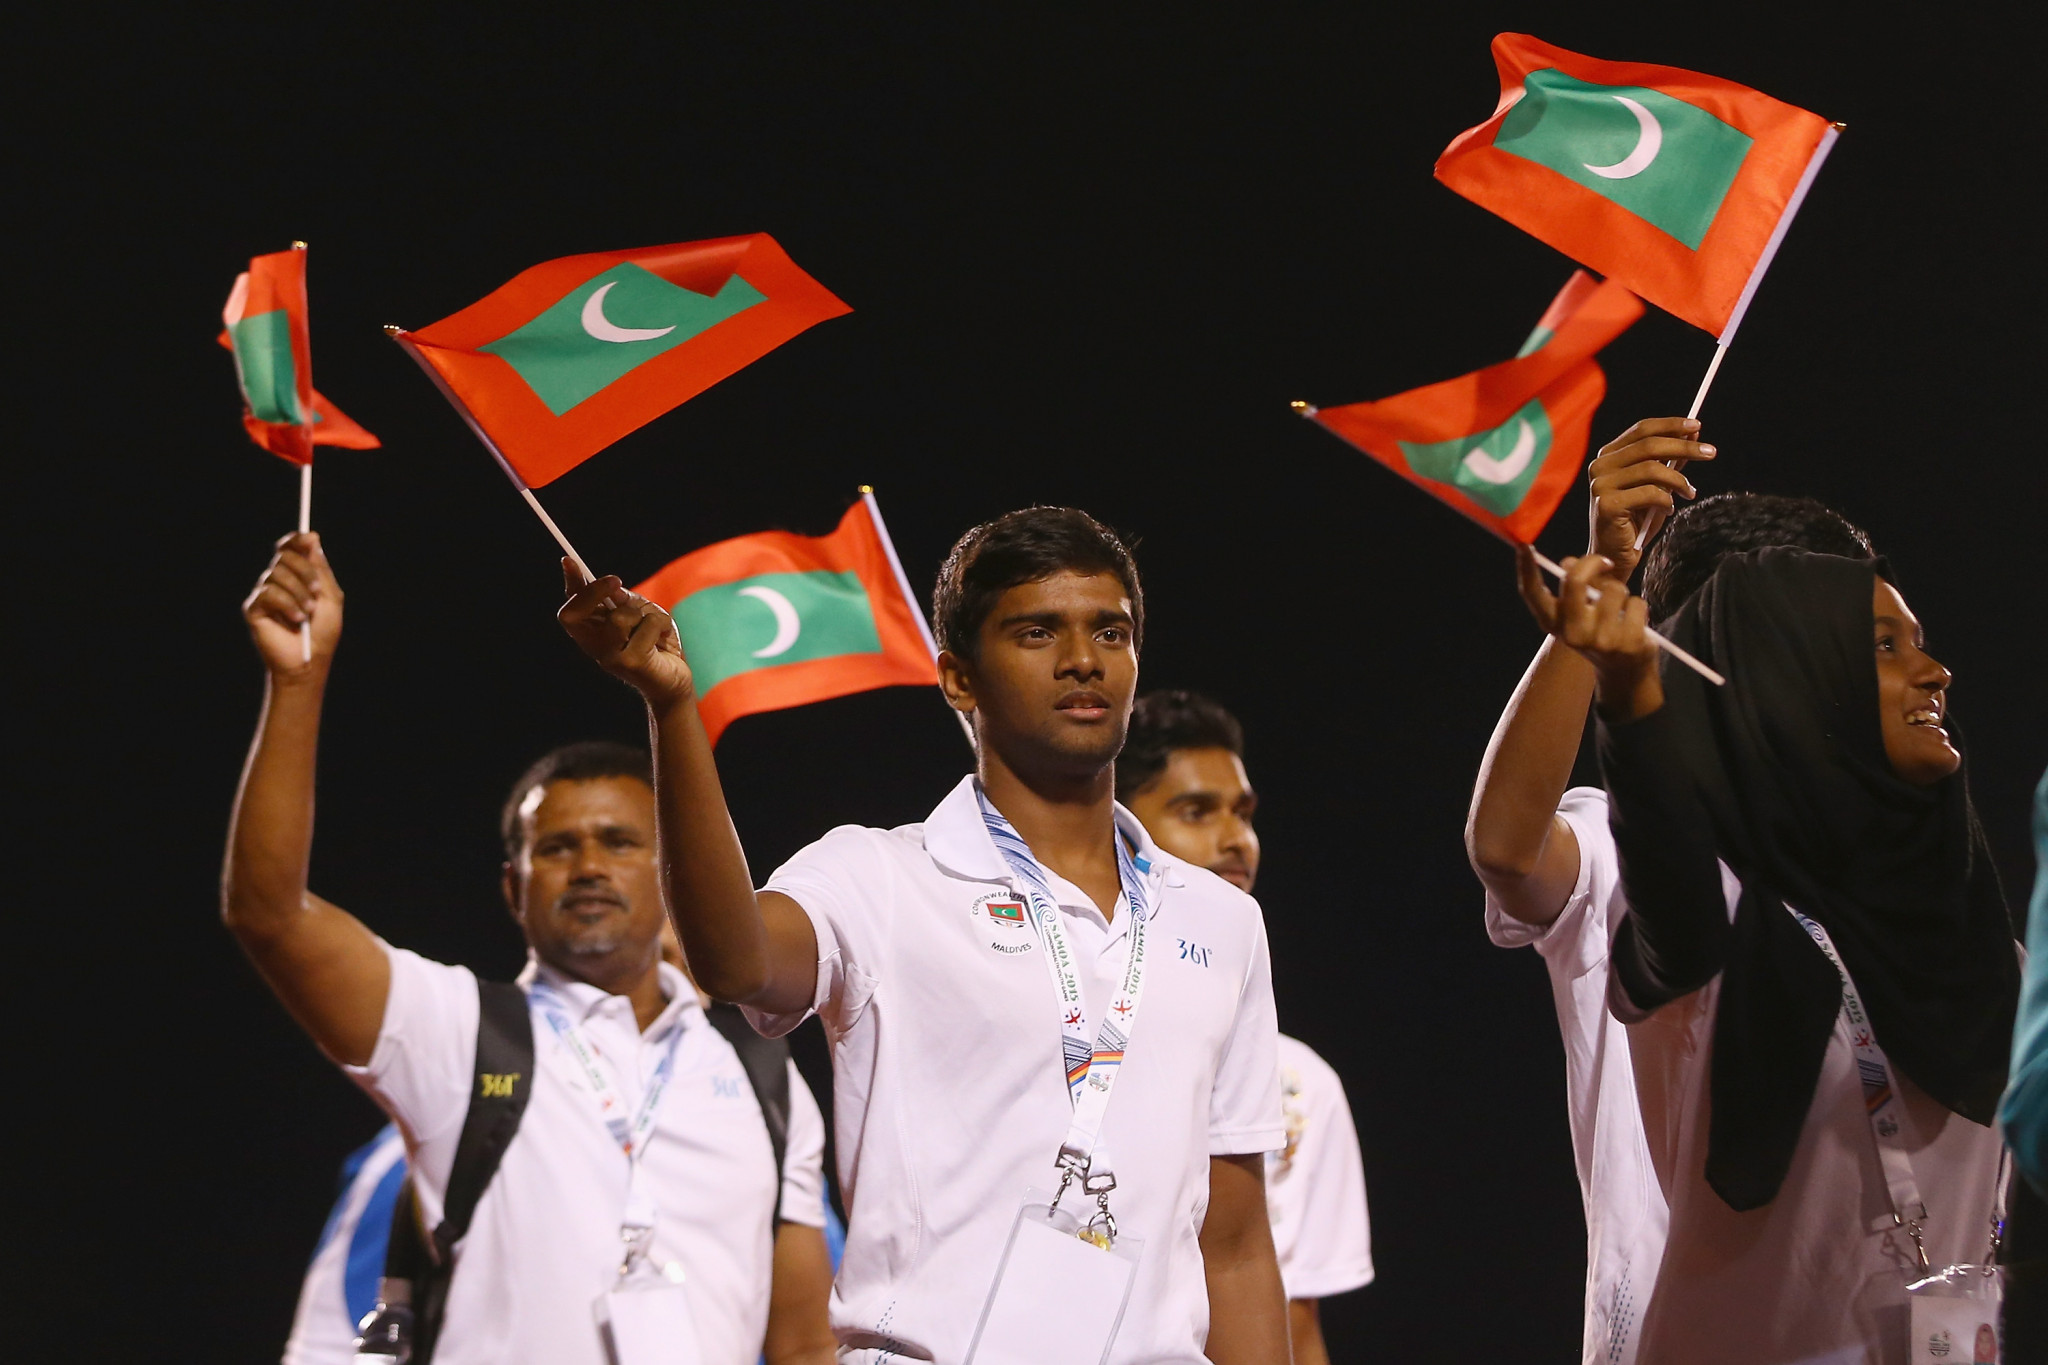 Maldives readmitted as member of Commonwealth Games Federation